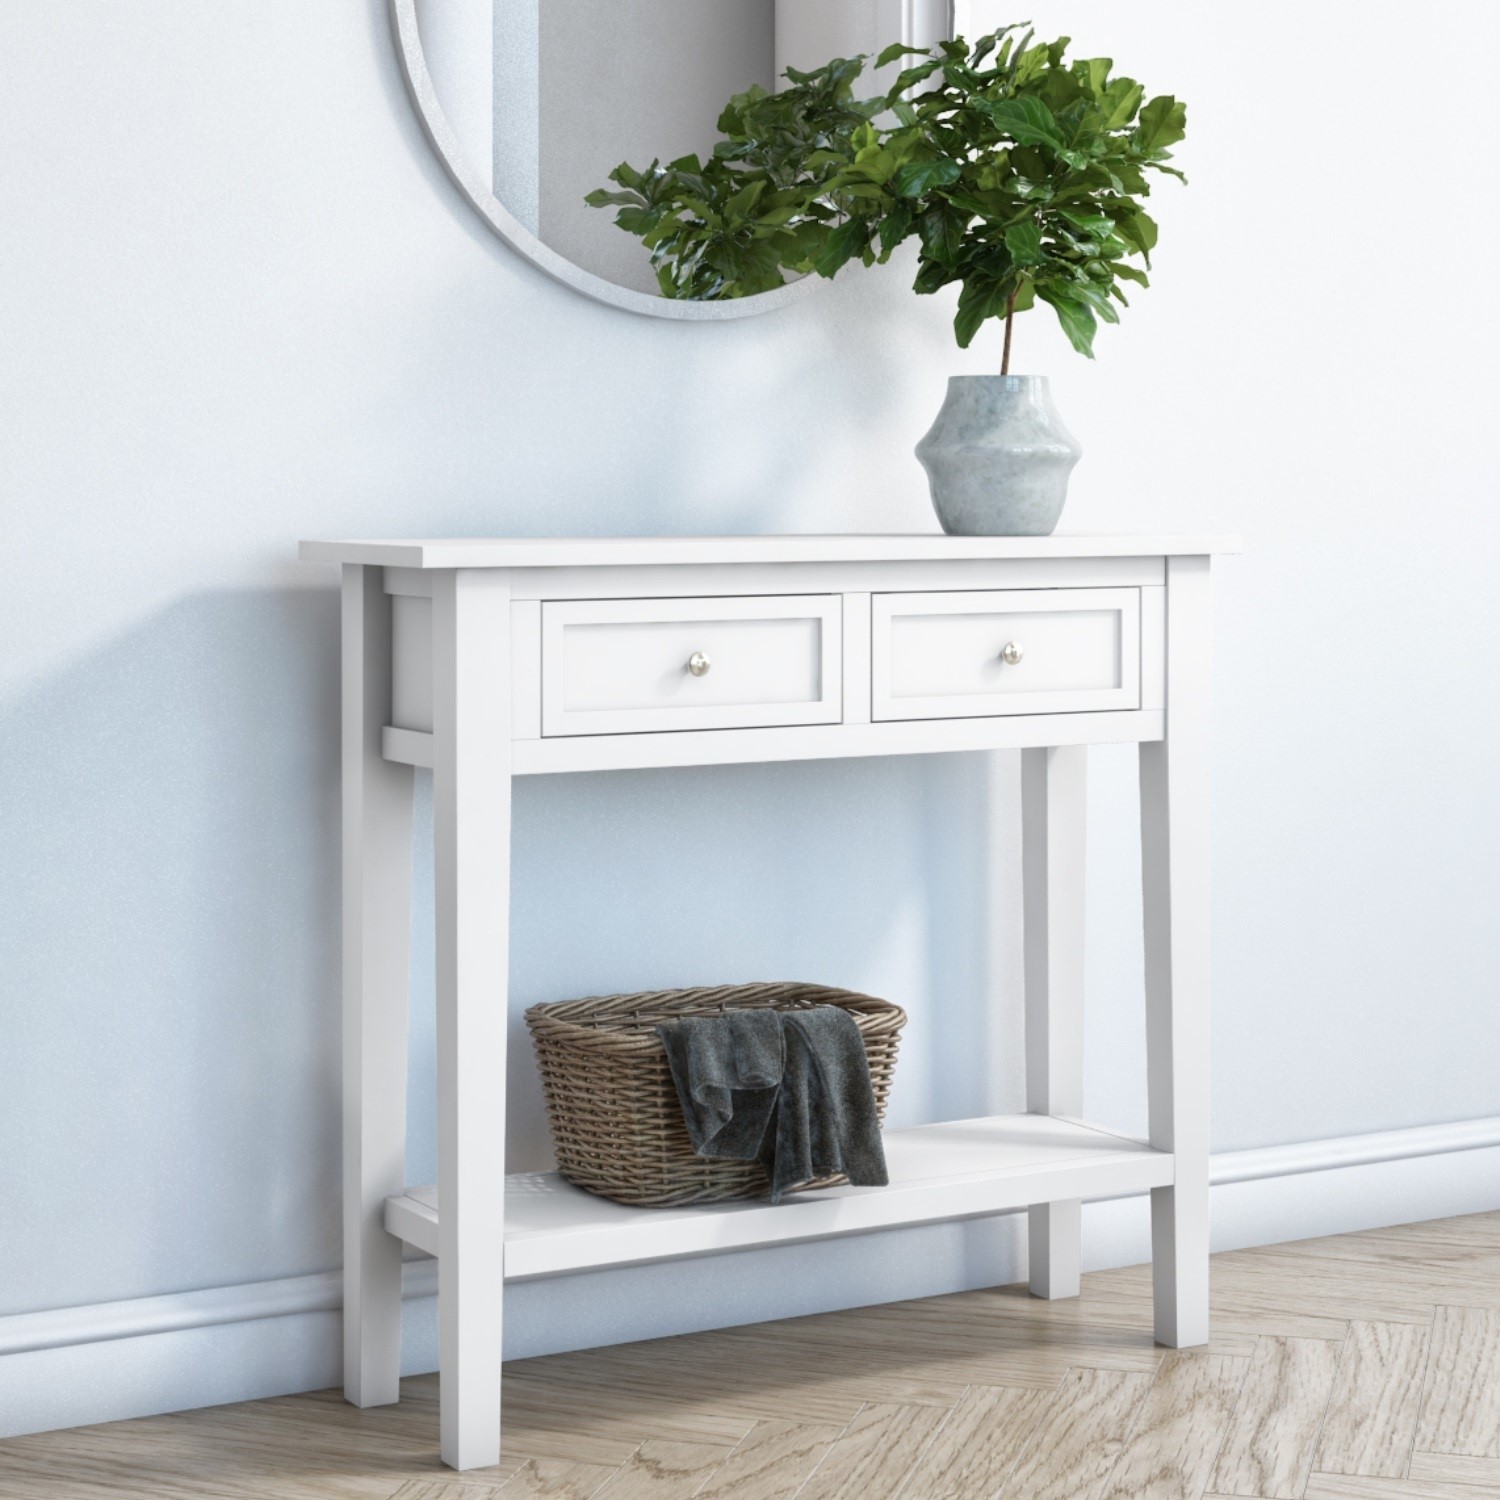 Narrow Console Table With Drawers In, Narrow Console Cabinet With Storage